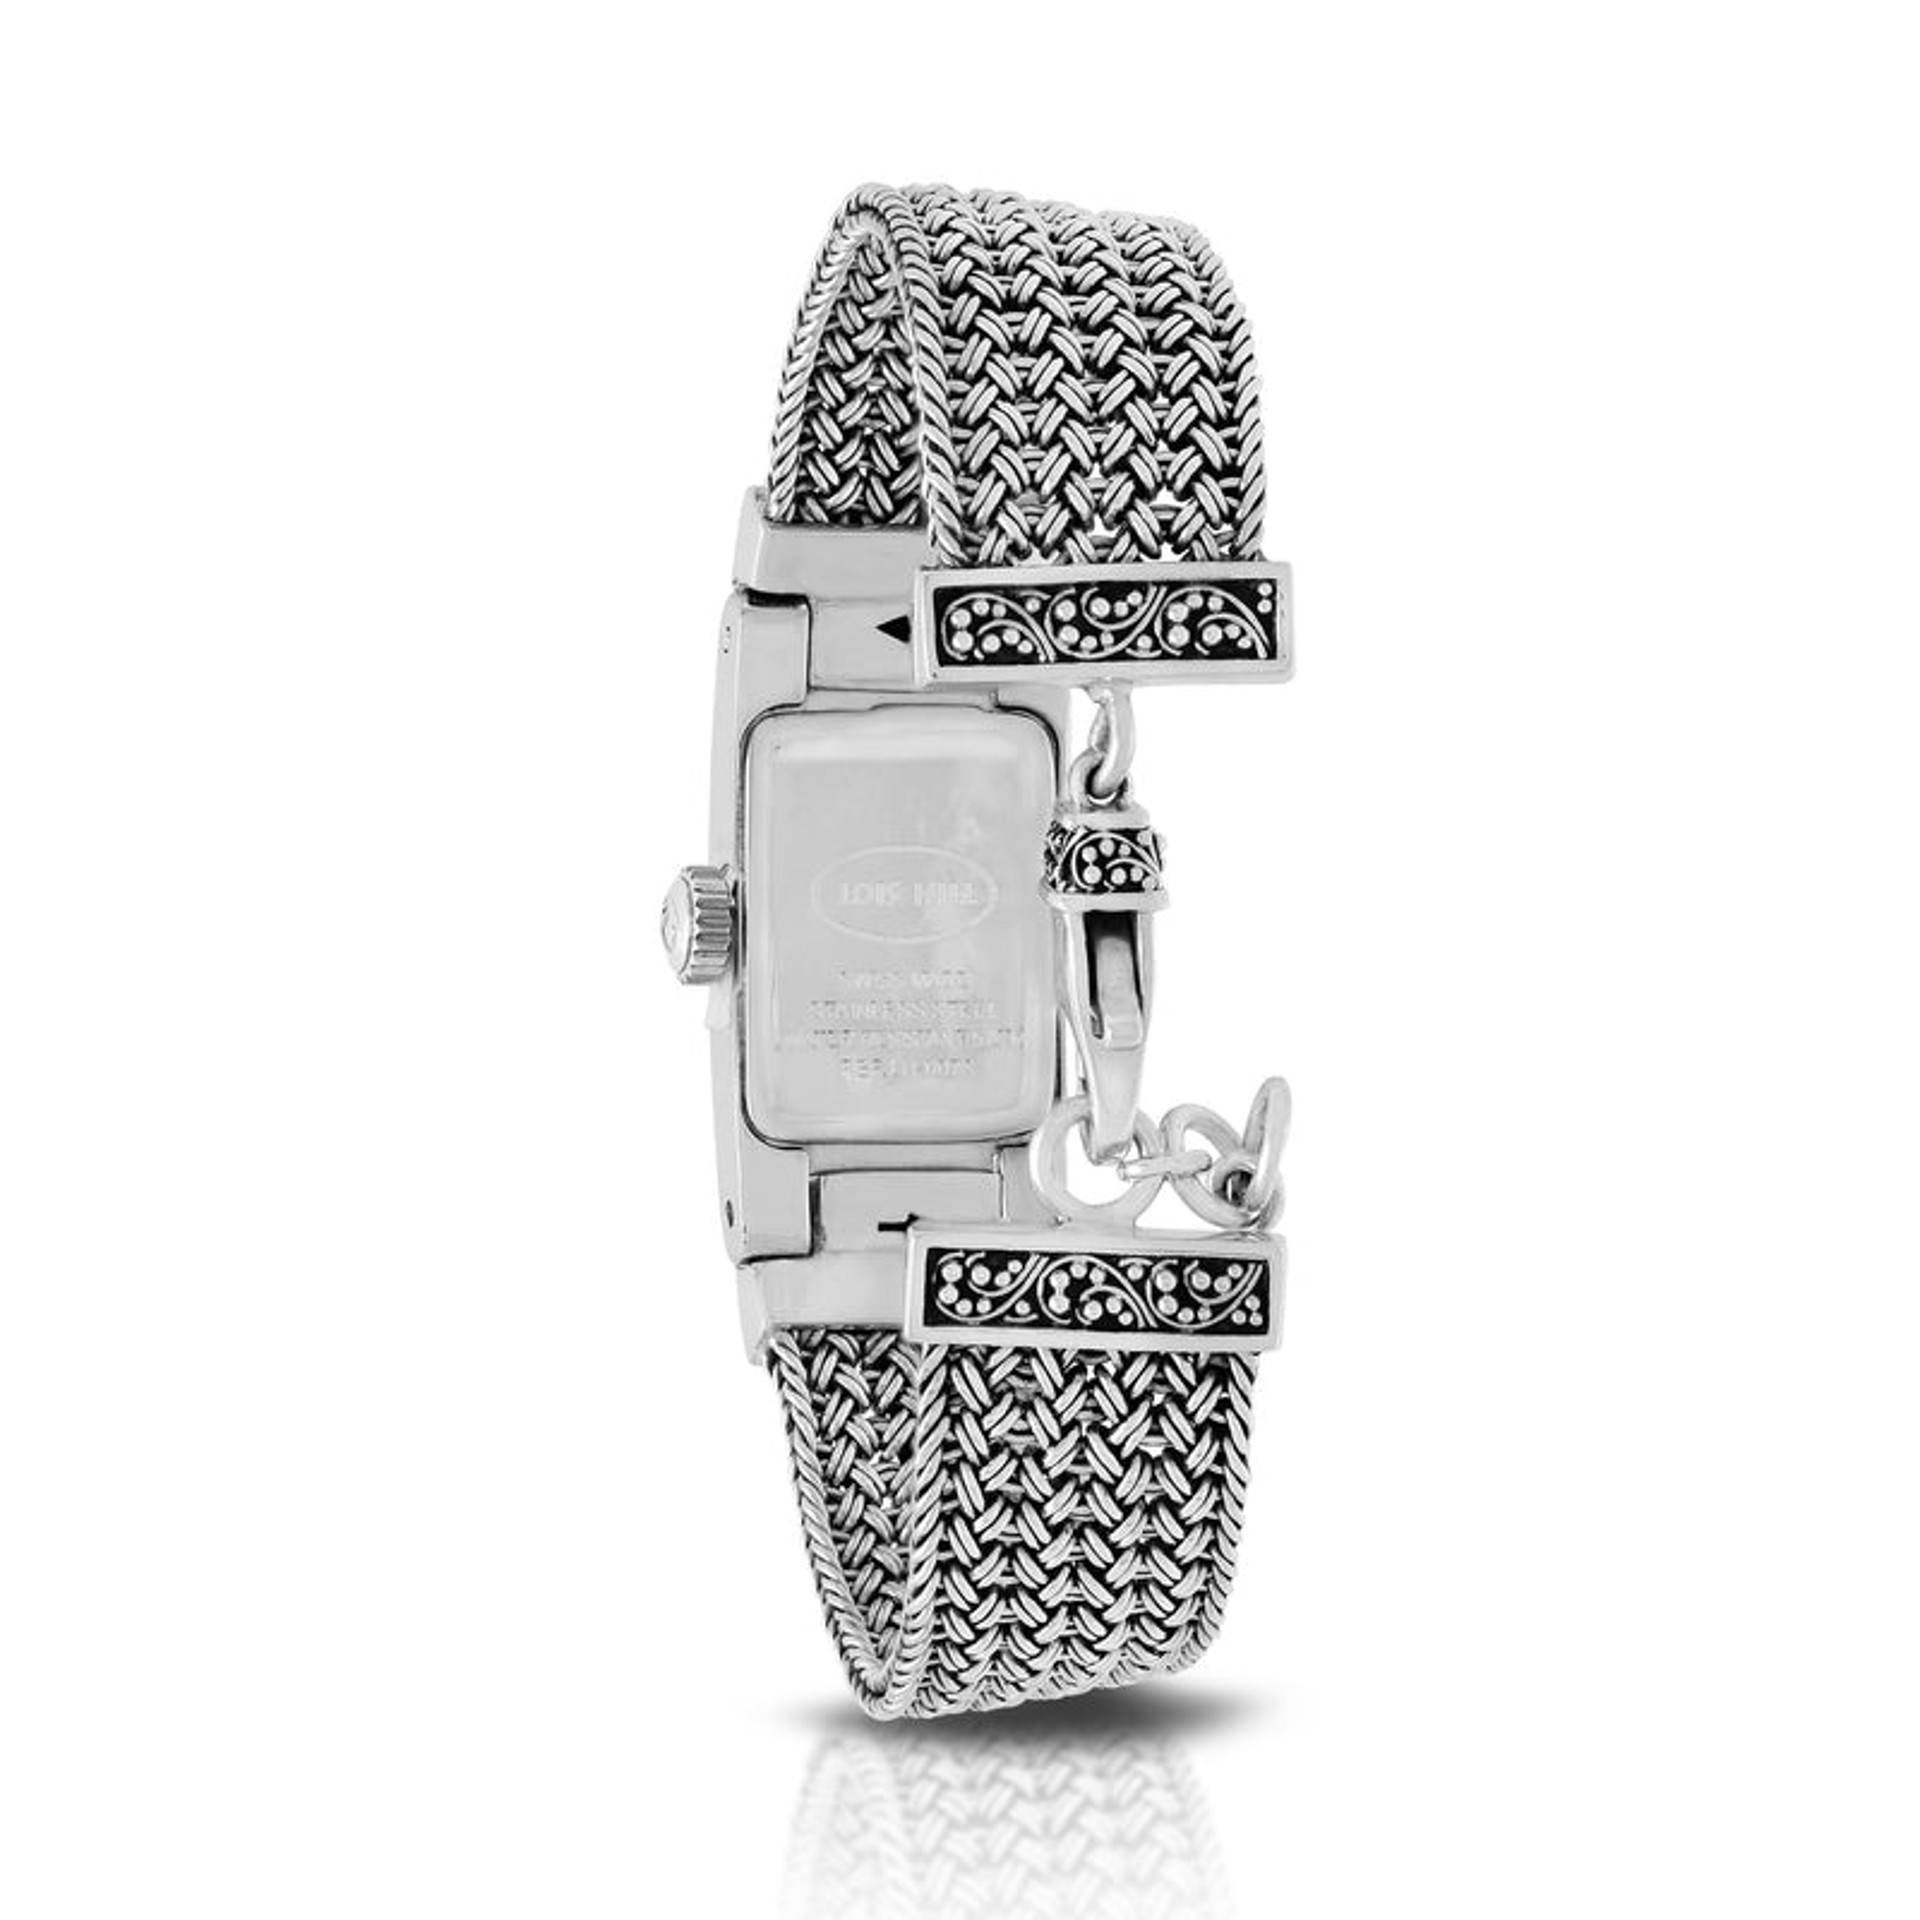 9762 Scroll Engraved Rectangular Bezel Watch with Handwoven Sterling Silver Textile Weave Band by Lois Hill